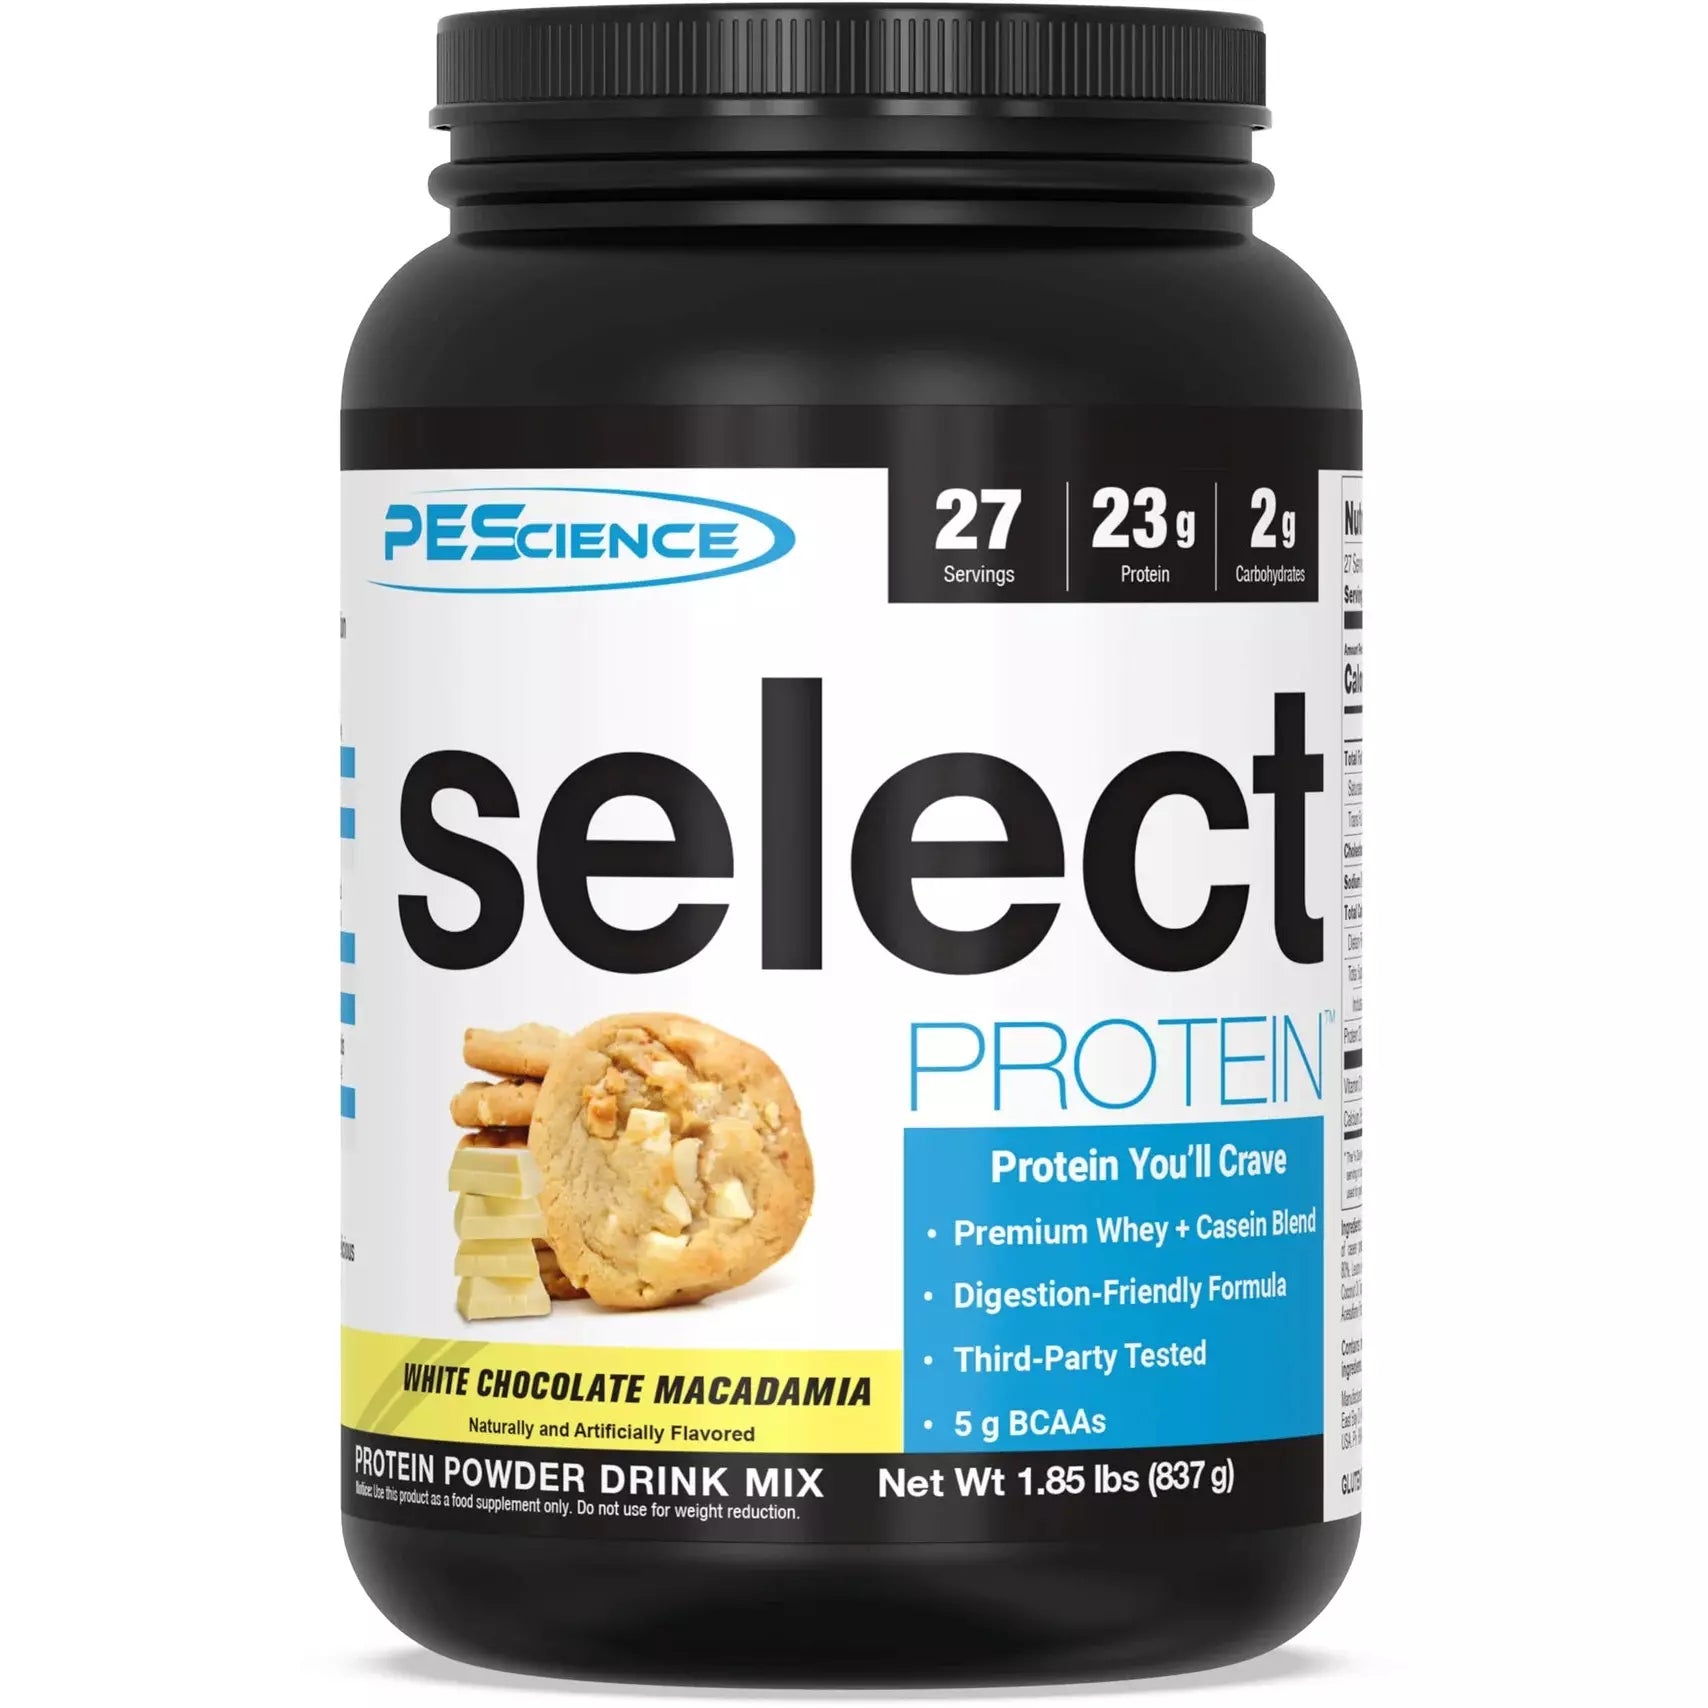 PEScience Select Protein (27 servings) Whey Protein Blend NEW! White Chocolate Macadamia PEScience pescience-select-protein-30-servings